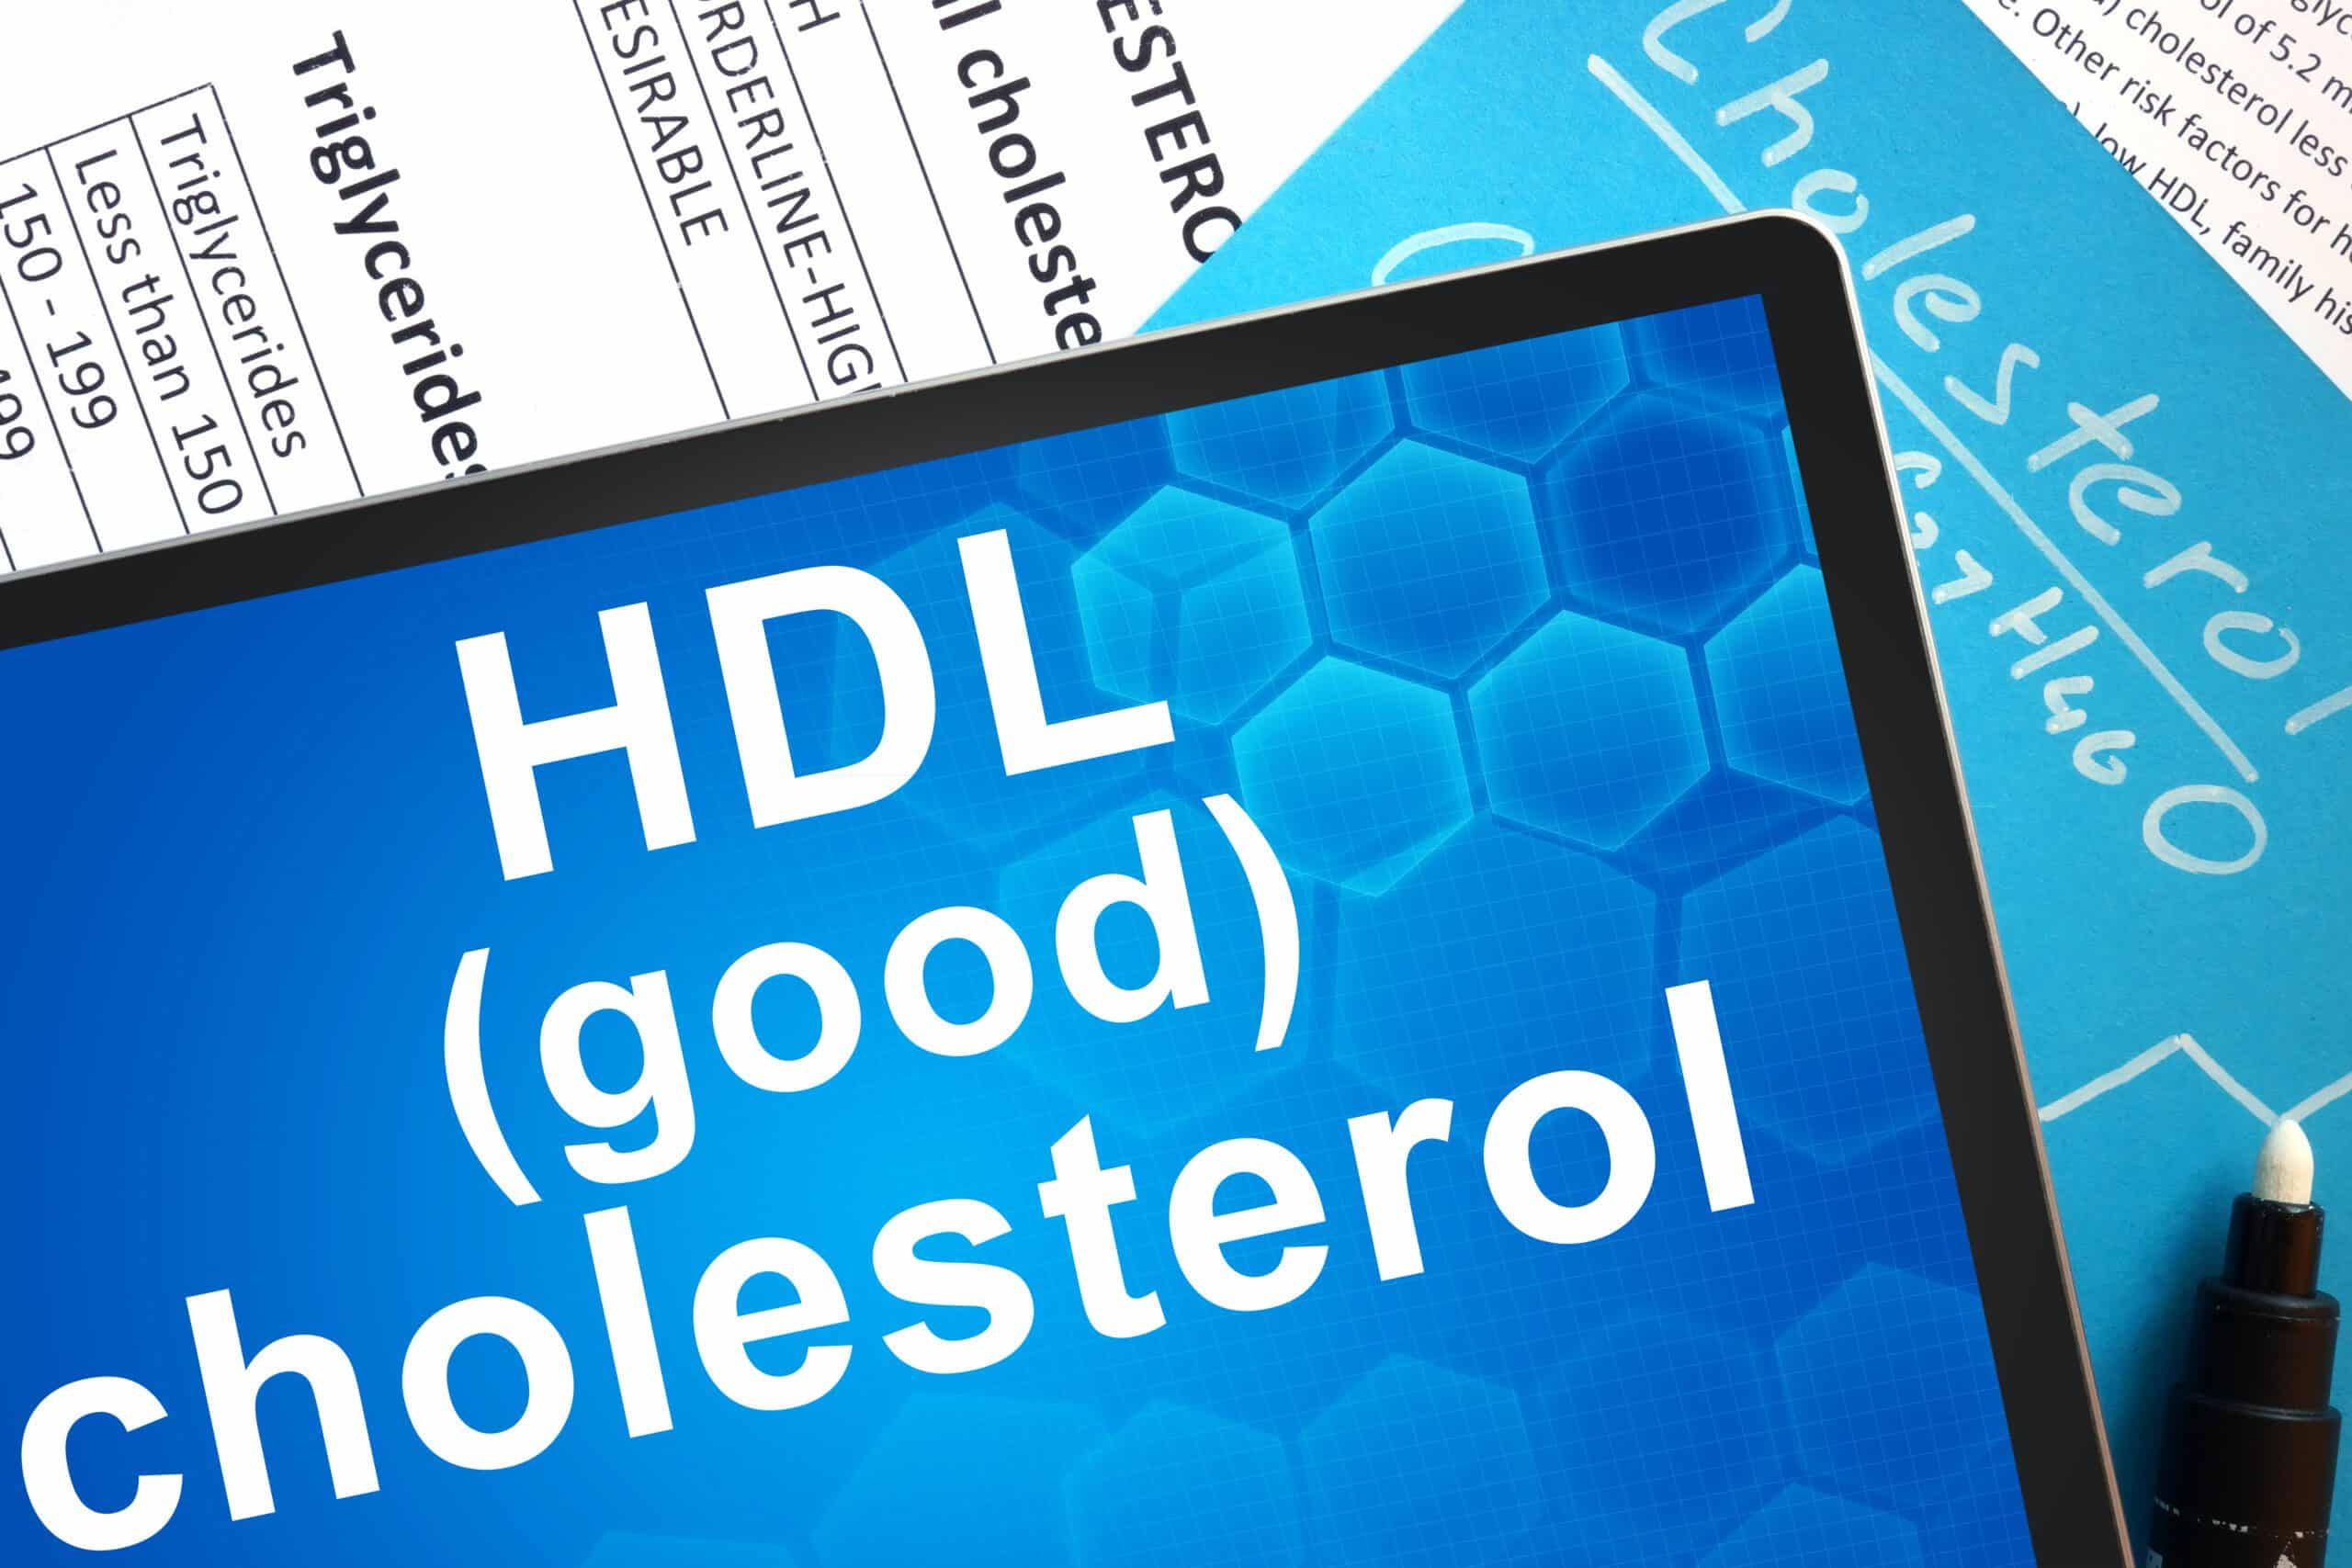 Colesterol HDL Good scaled